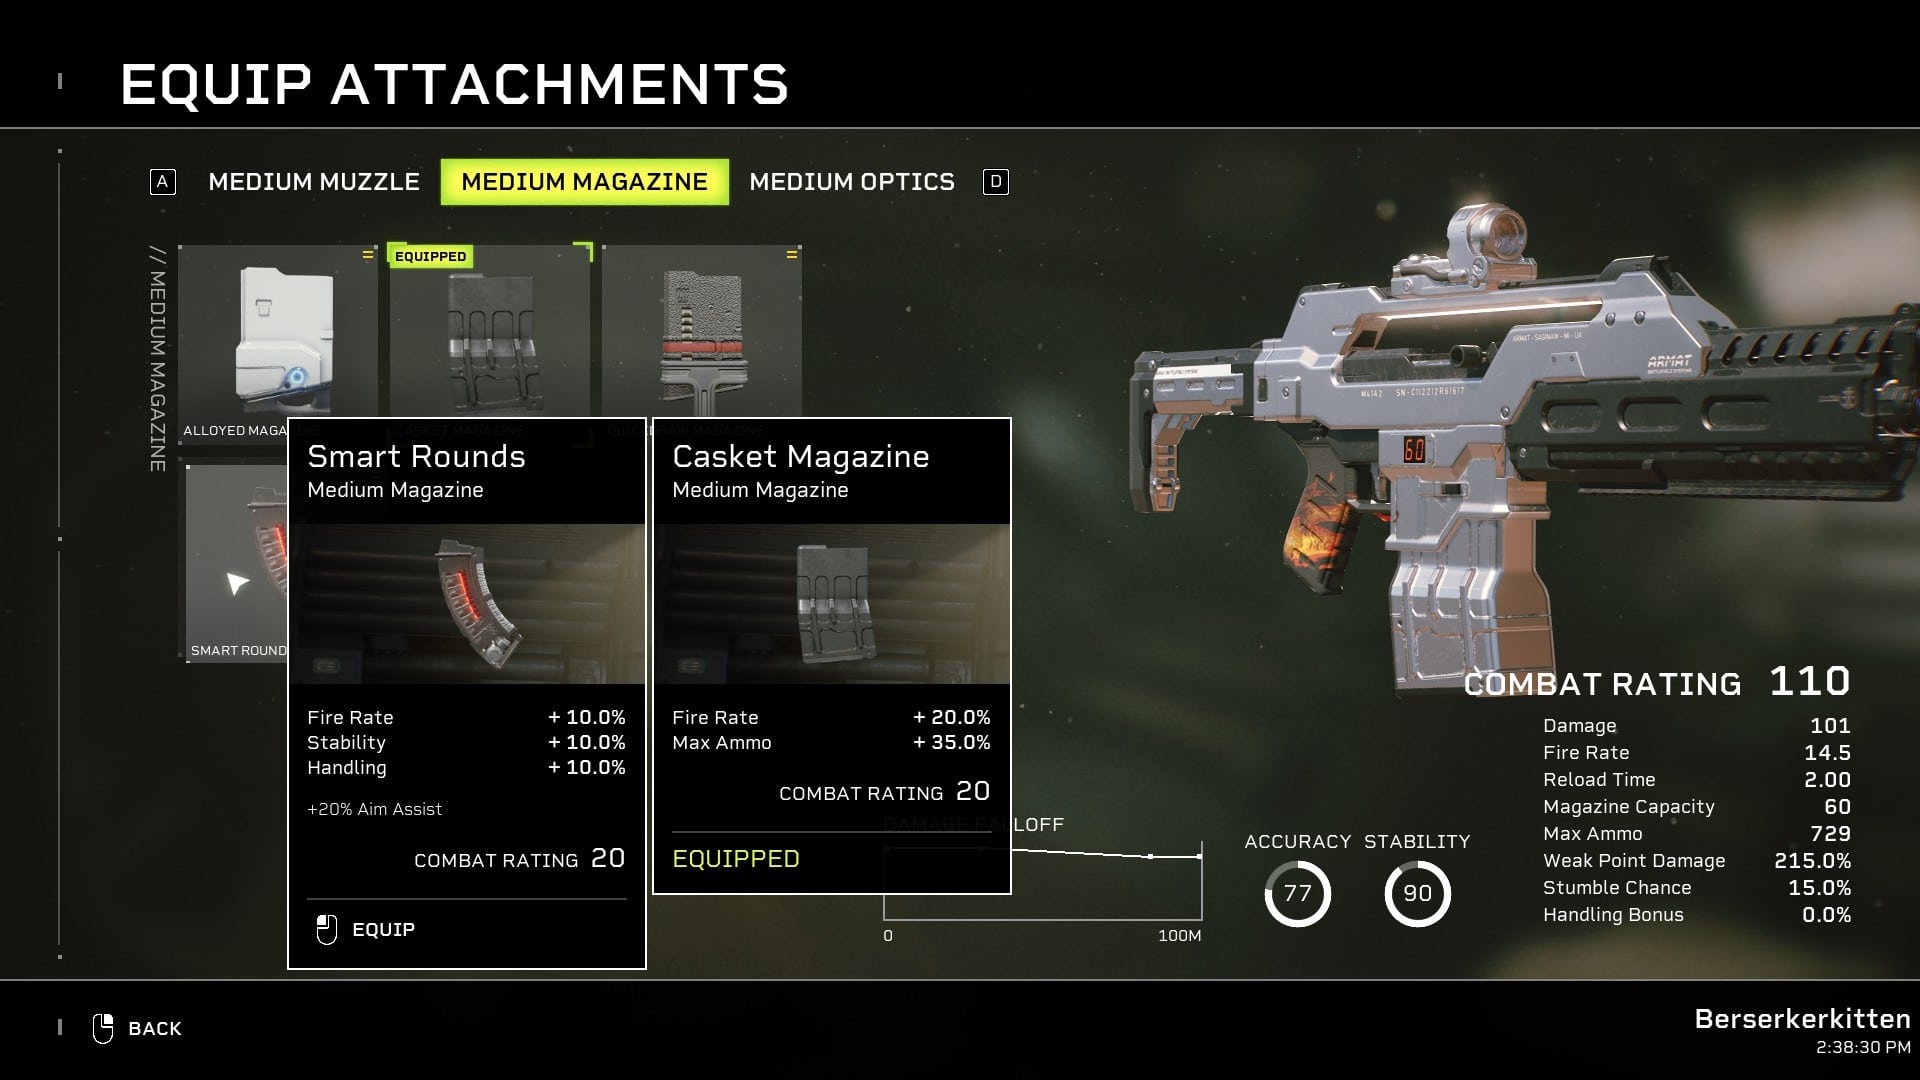 You can decorate weapons via paint jobs and stickers and change their attributes through modifications.